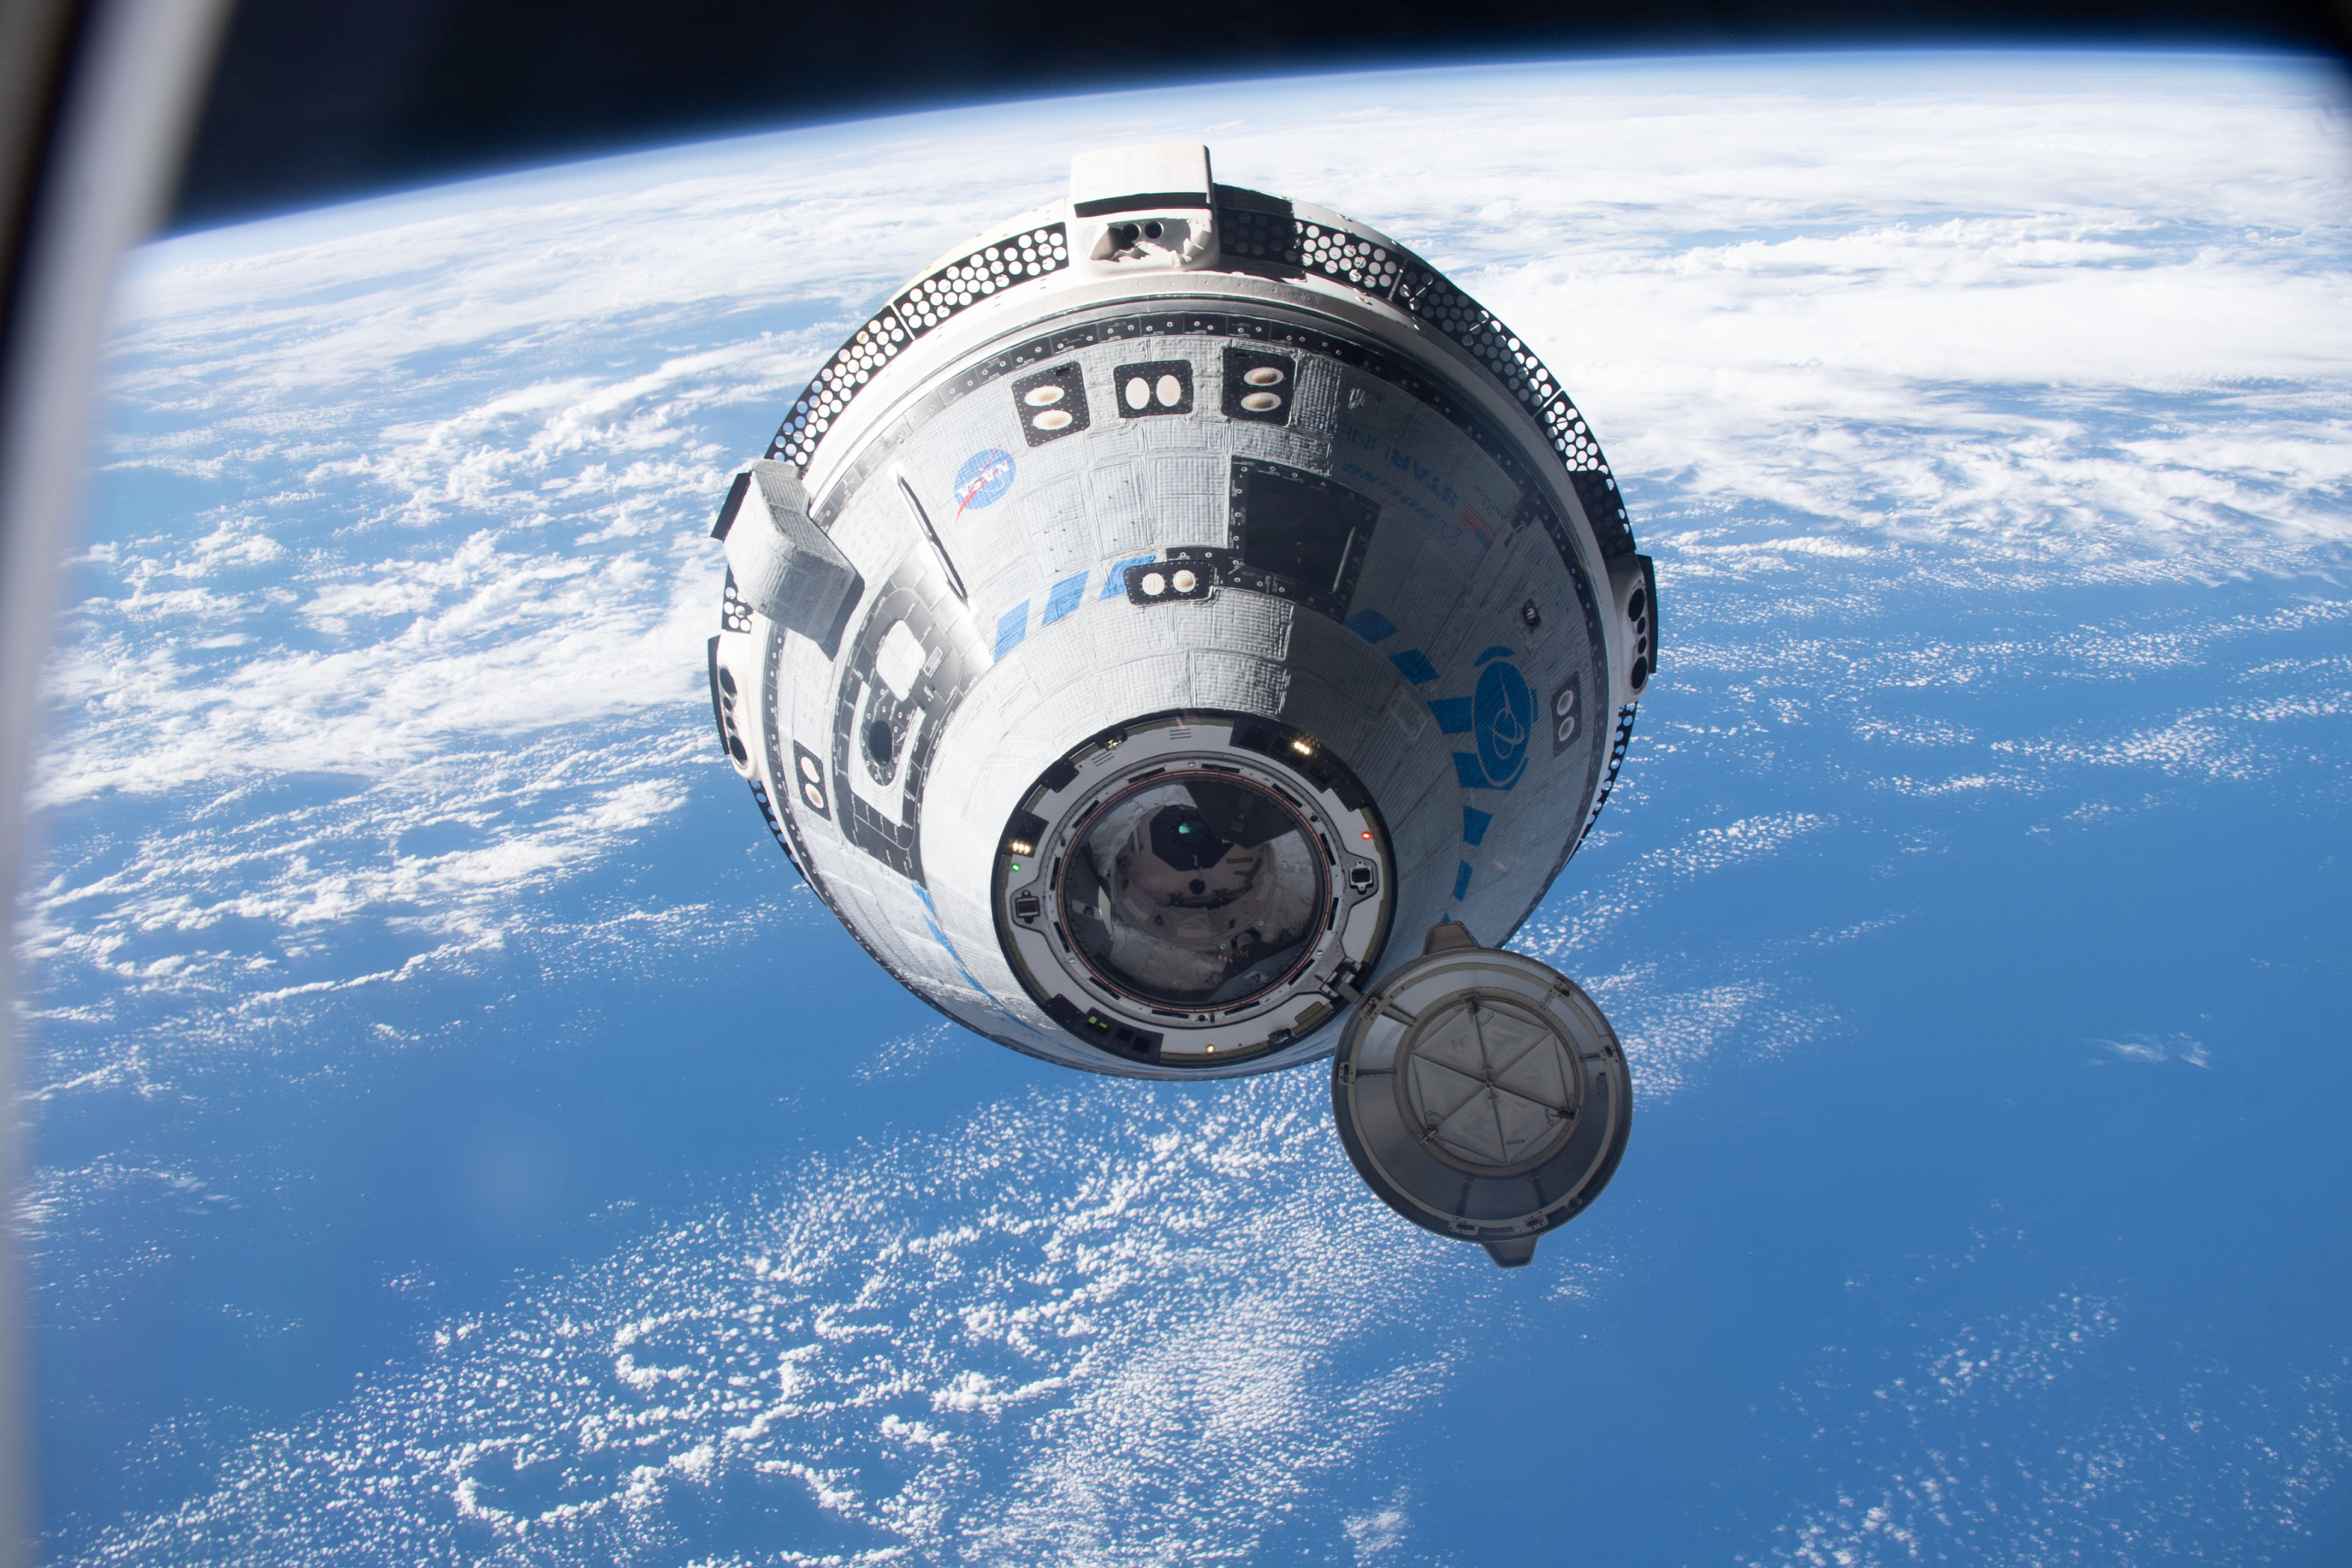 After repeated delays, Starliner finally blasts into space